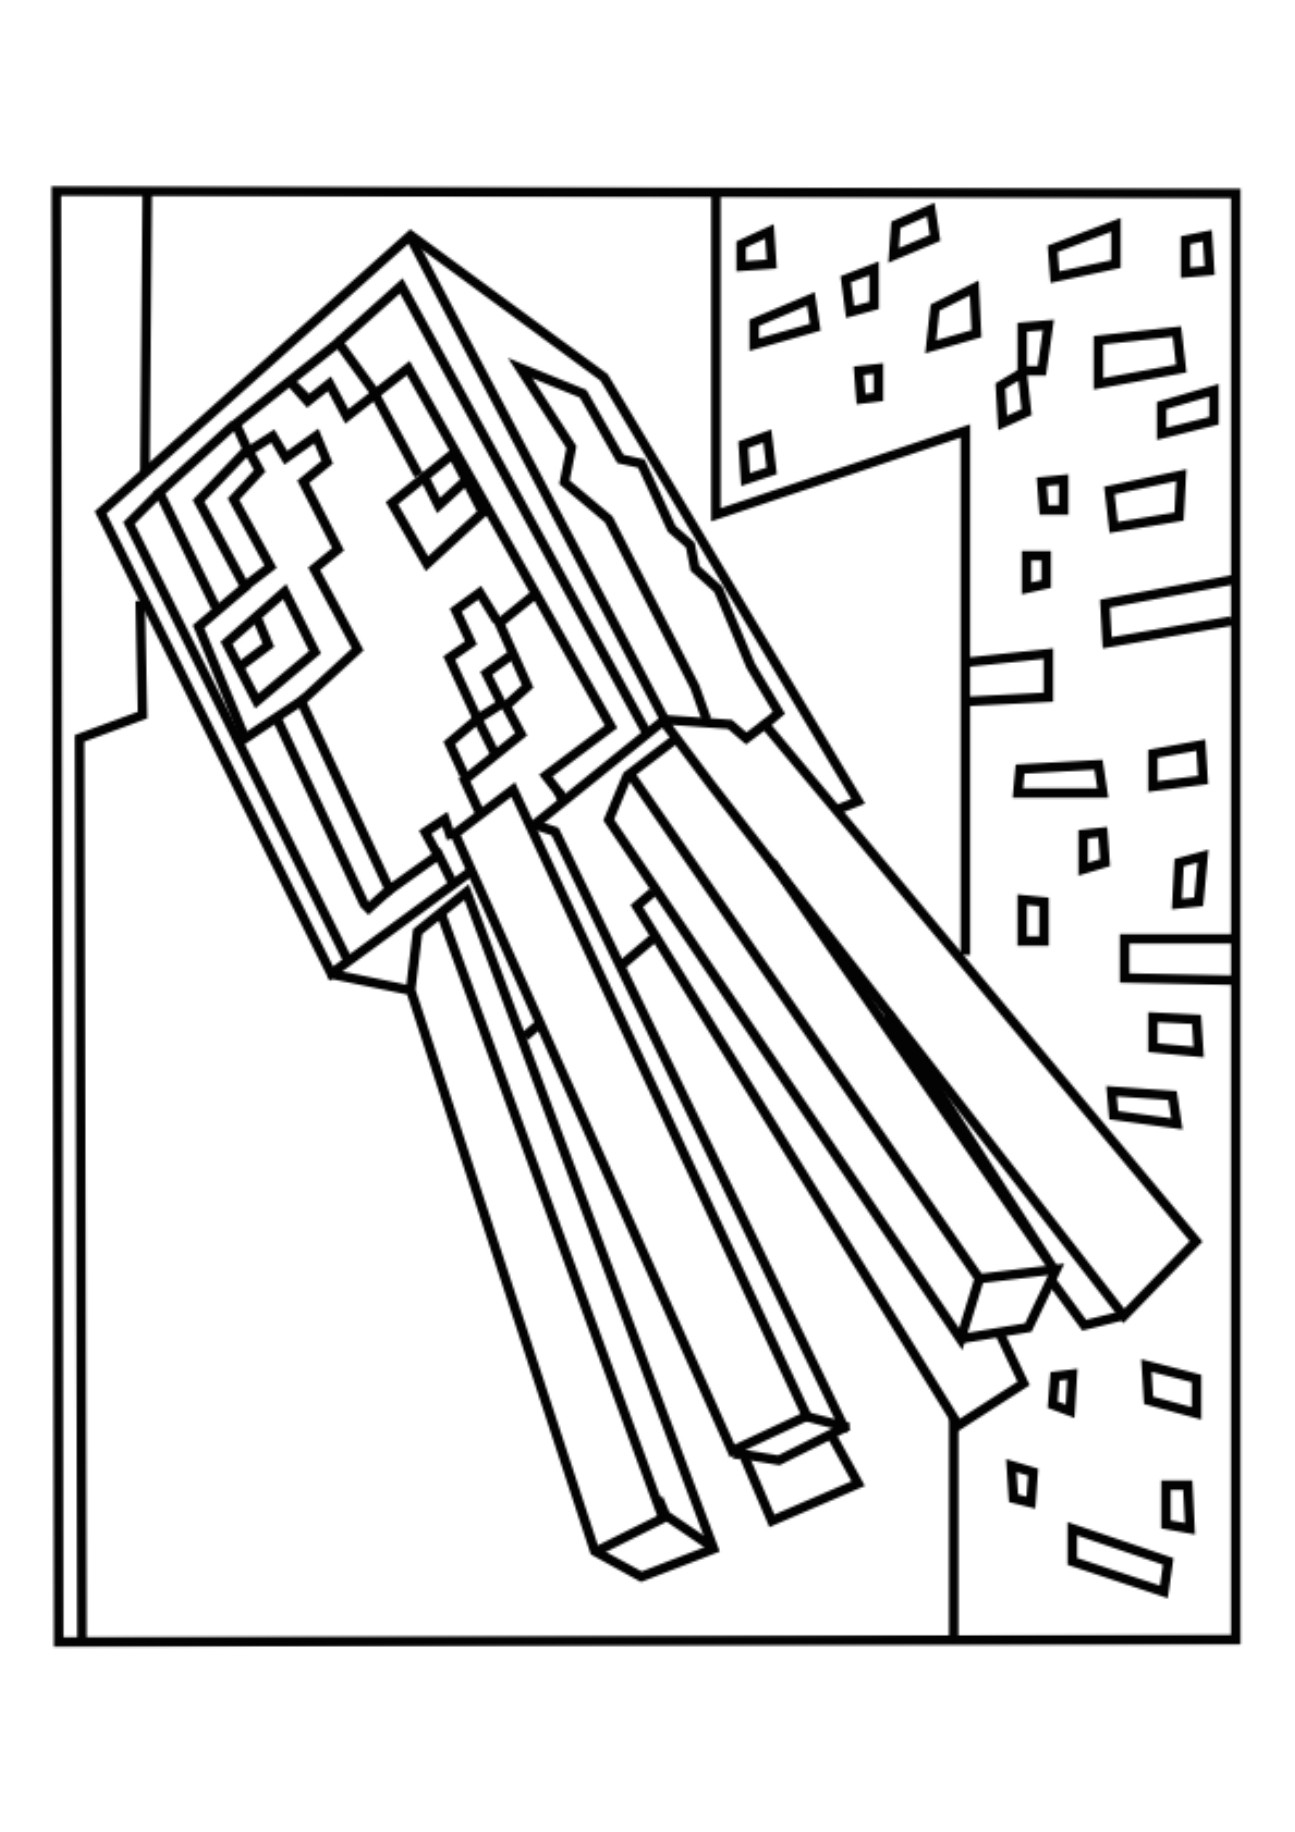 Minecraft Villager Coloring Pages at GetColorings.com | Free printable ...